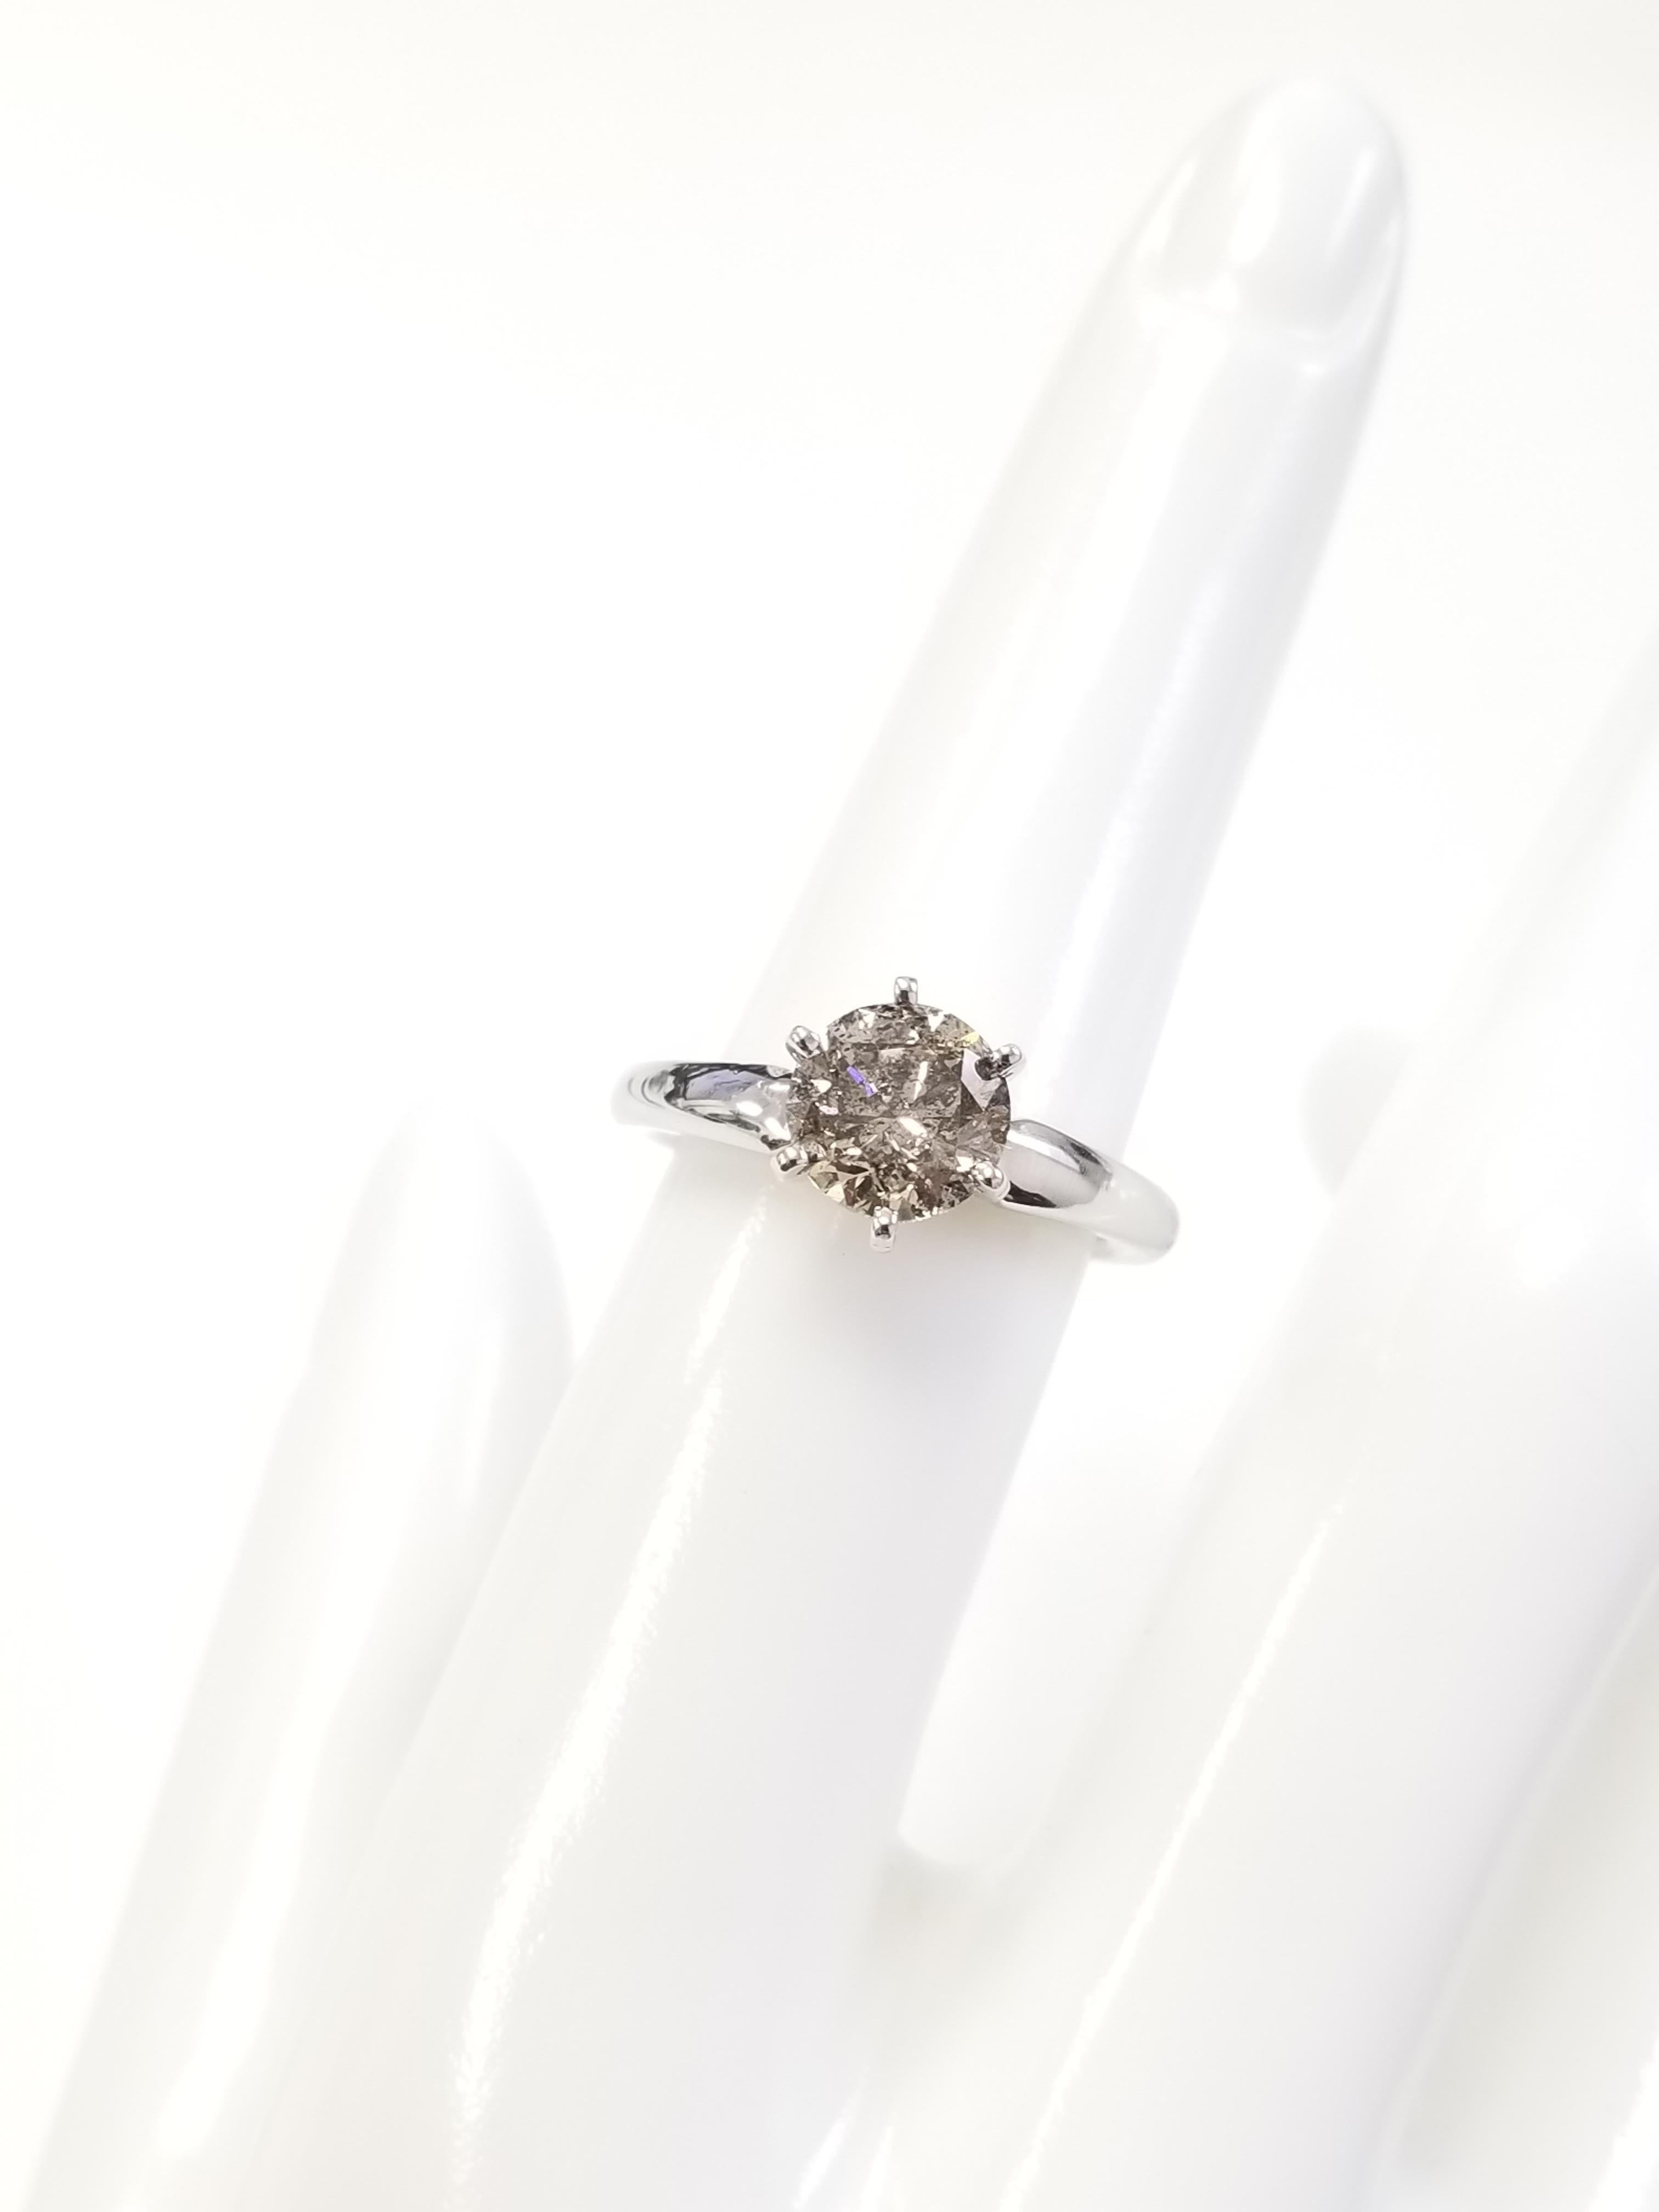 Natural fancy brown round diamond weighing 1.70 ct. Set on 6-prong 14K solitaire white gold.
Ring size: 6.5 (Free Resize)